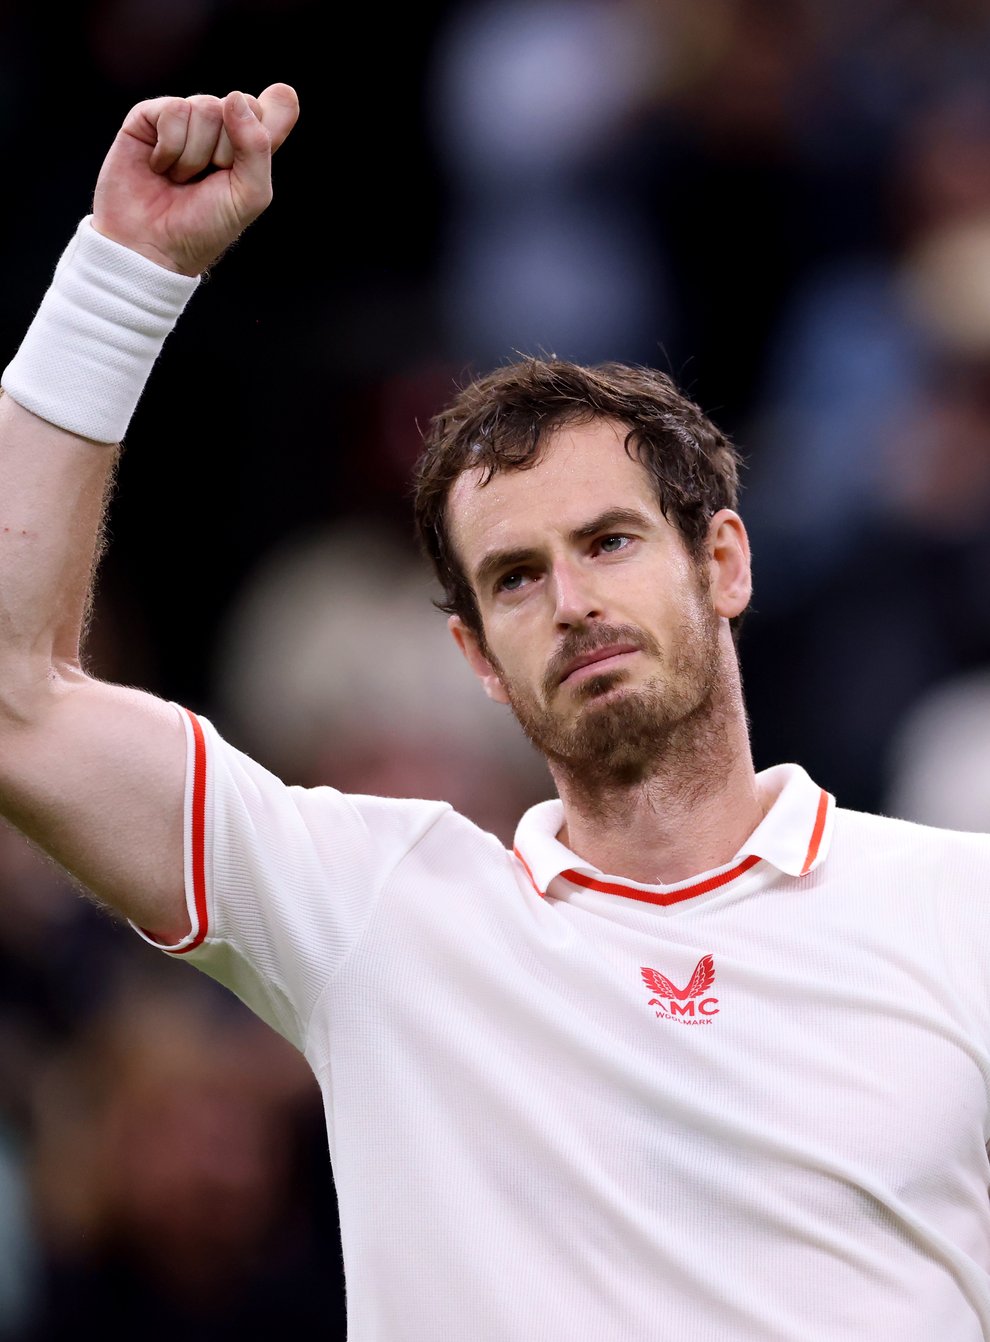 Andy Murray admitted he will not be making any long-term goals until after the US Open (Steven Paston/PA)